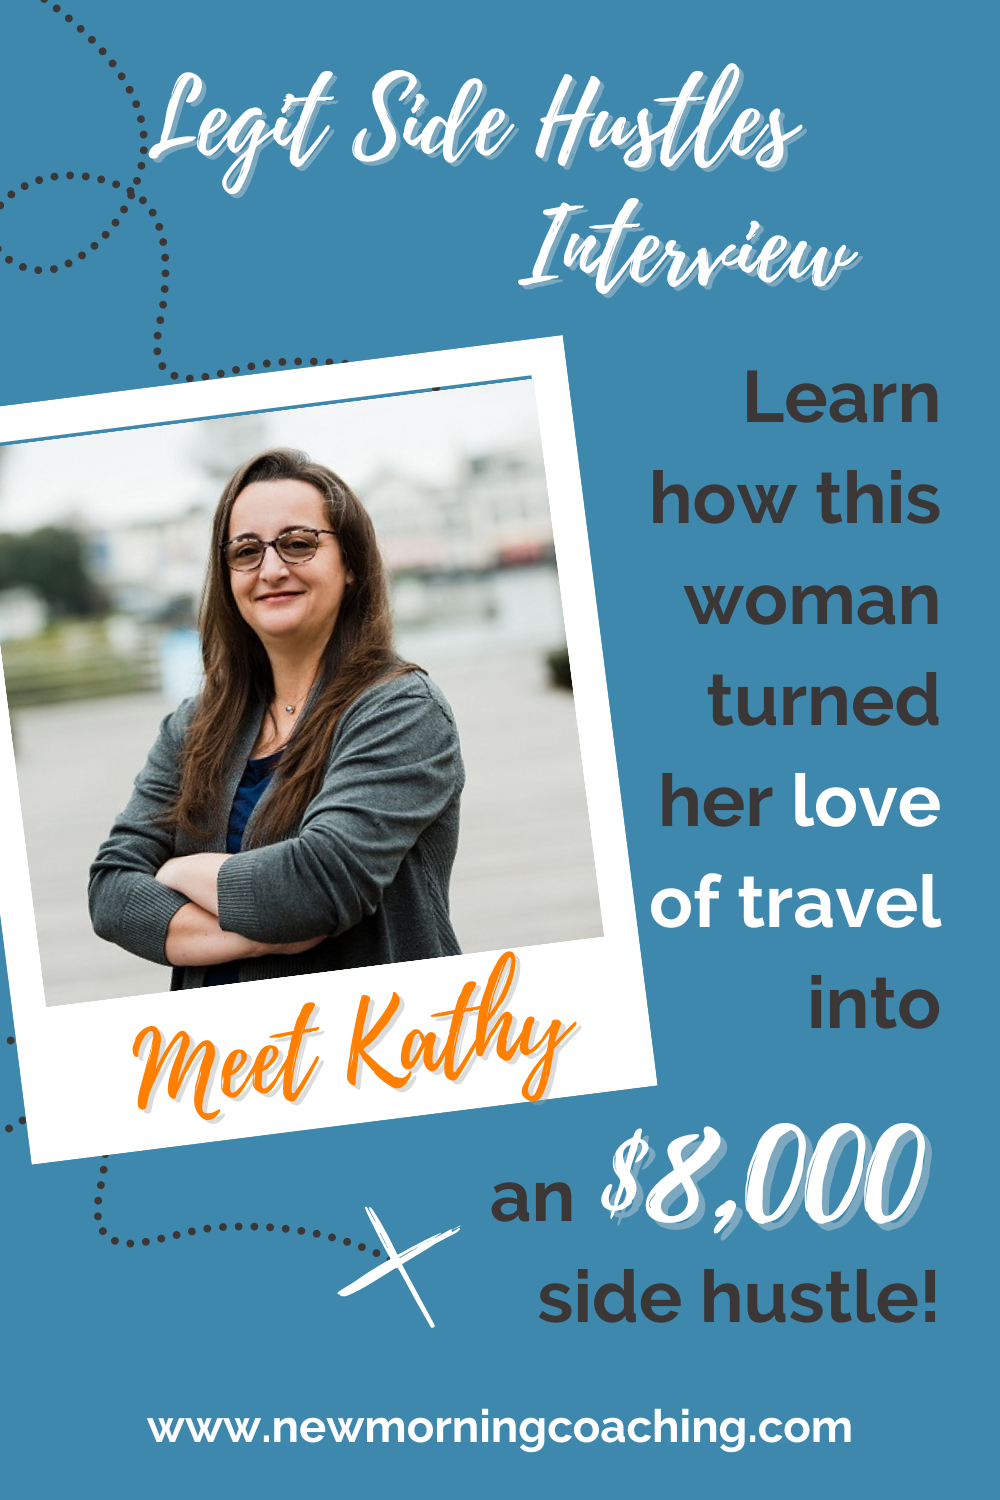 Legit side hustle interviews: learn how this woman turned her love of travel into an $8,000 side hustle